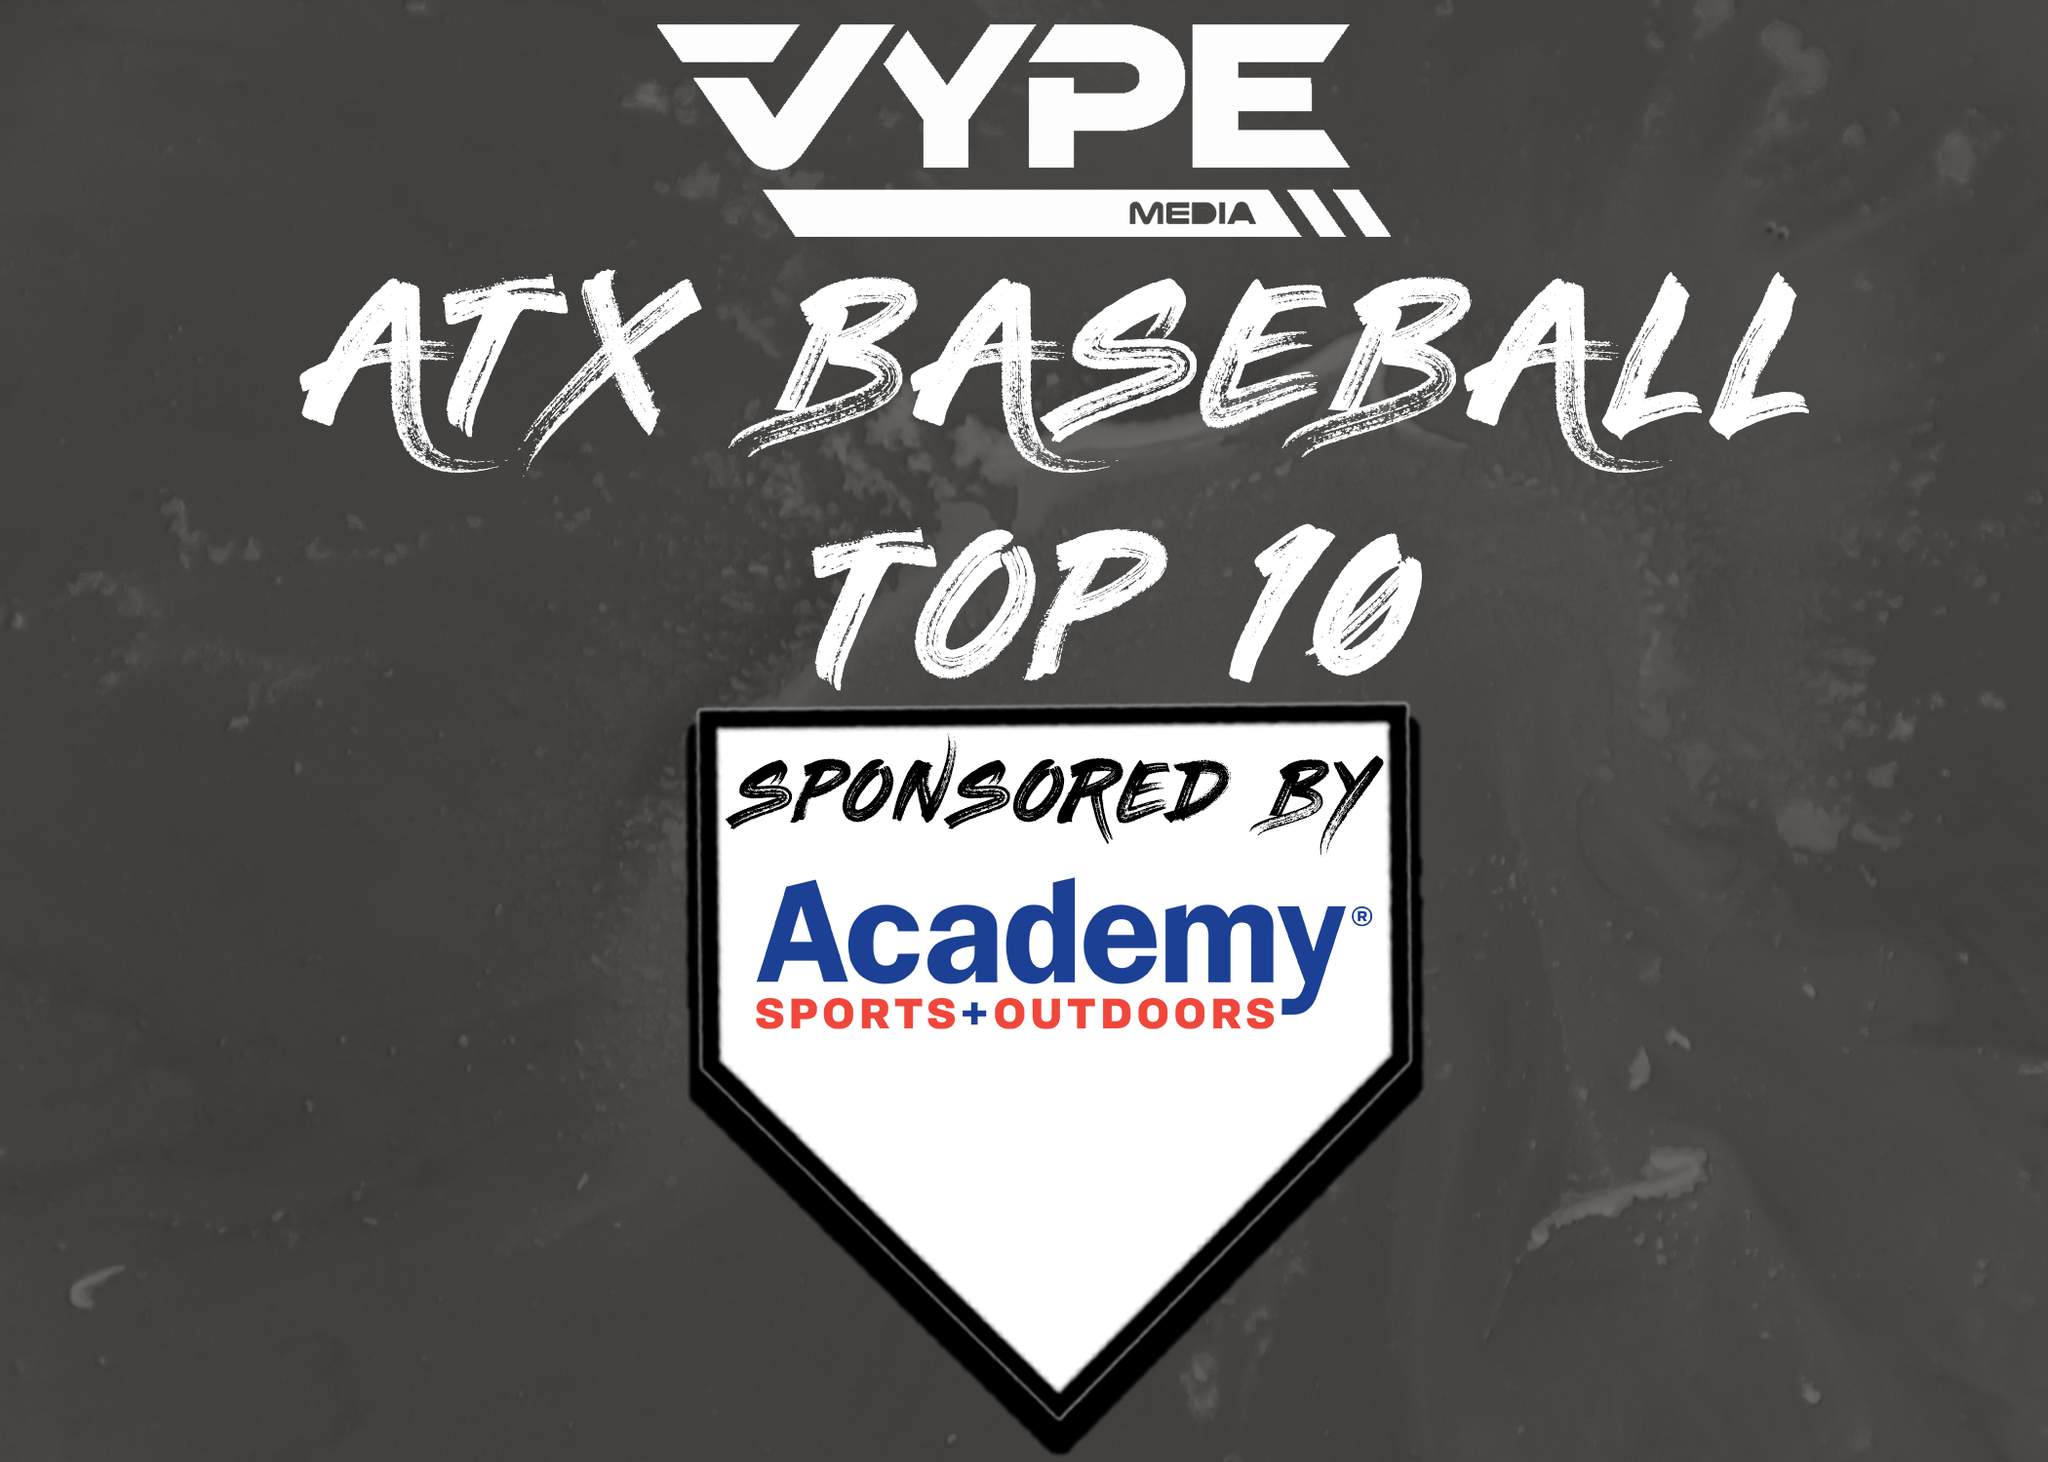 VYPE Austin Baseball Top 10 Rankings: Week of 03/22/2021 presented by Academy Sports + Outdoors